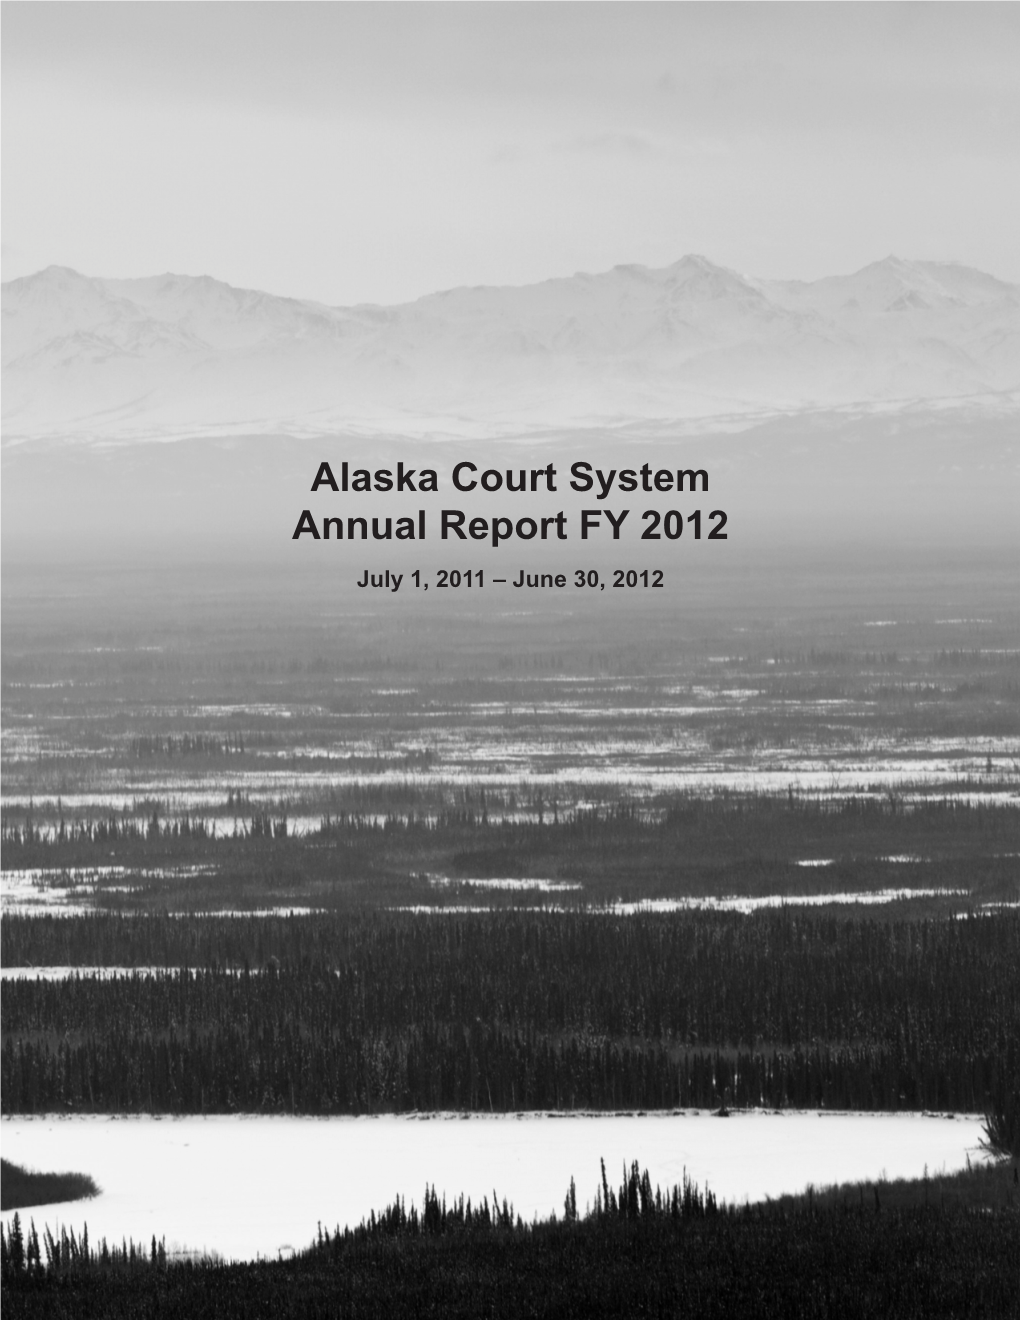 Alaska Court System Annual Report FY 2012